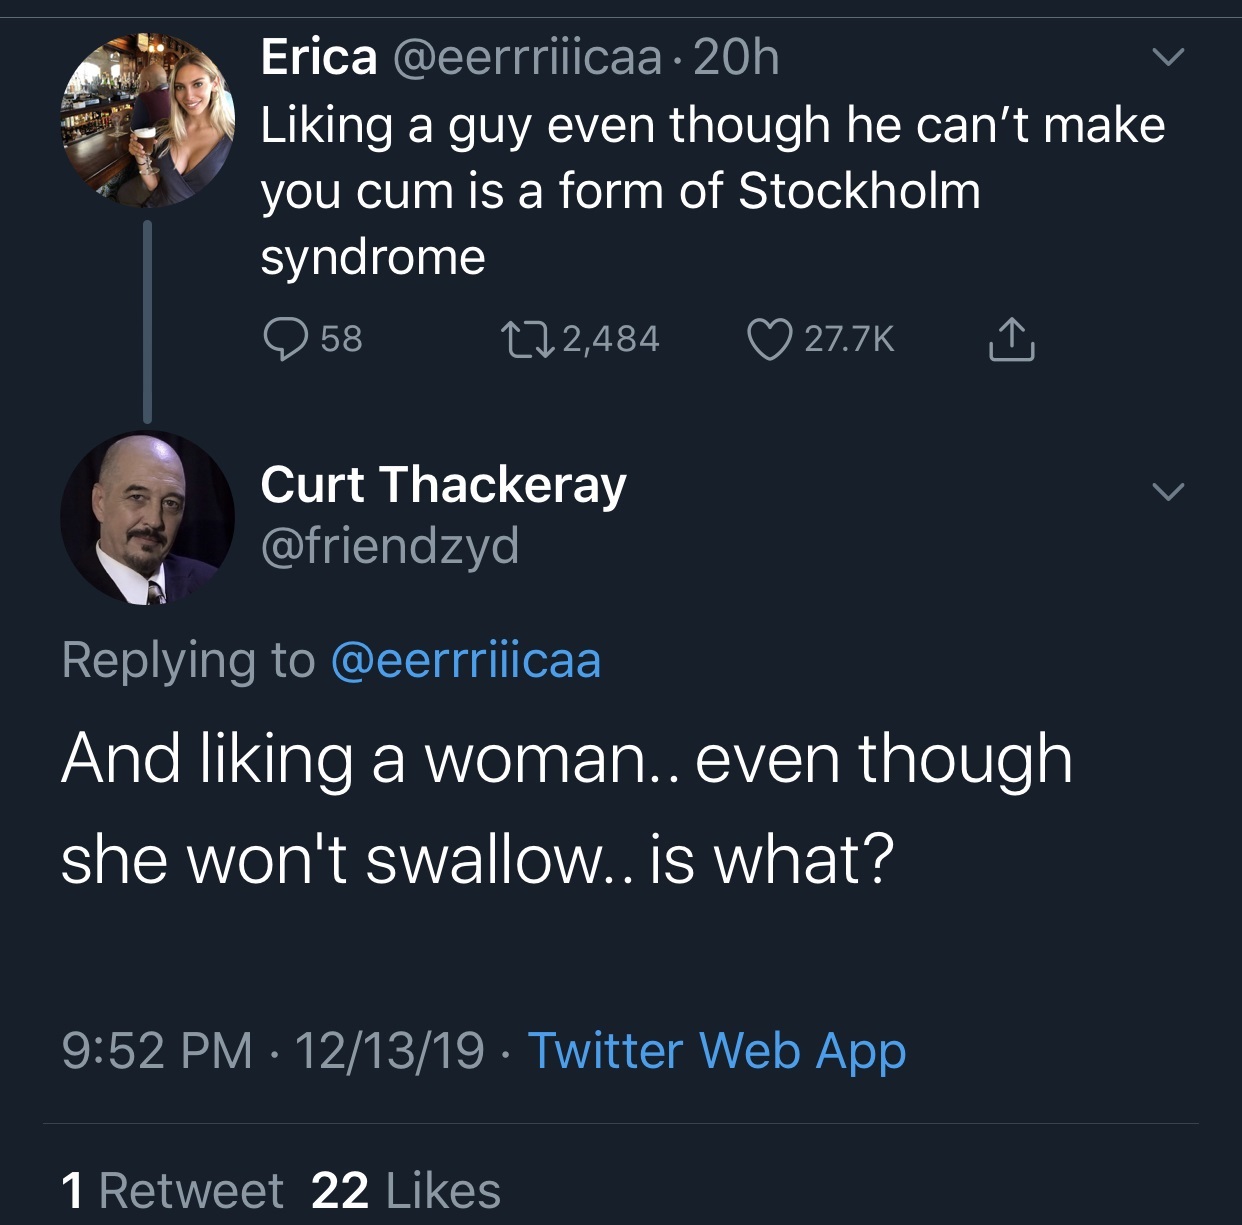 presentation - Erica 20h Liking a guy even though he can't make you cum is a form of Stockholm syndrome 258 222,484 Curt Thackeray And liking a woman.. even though she won't swallow.. is what? 121319 . Twitter Web App 1 Retweet 22